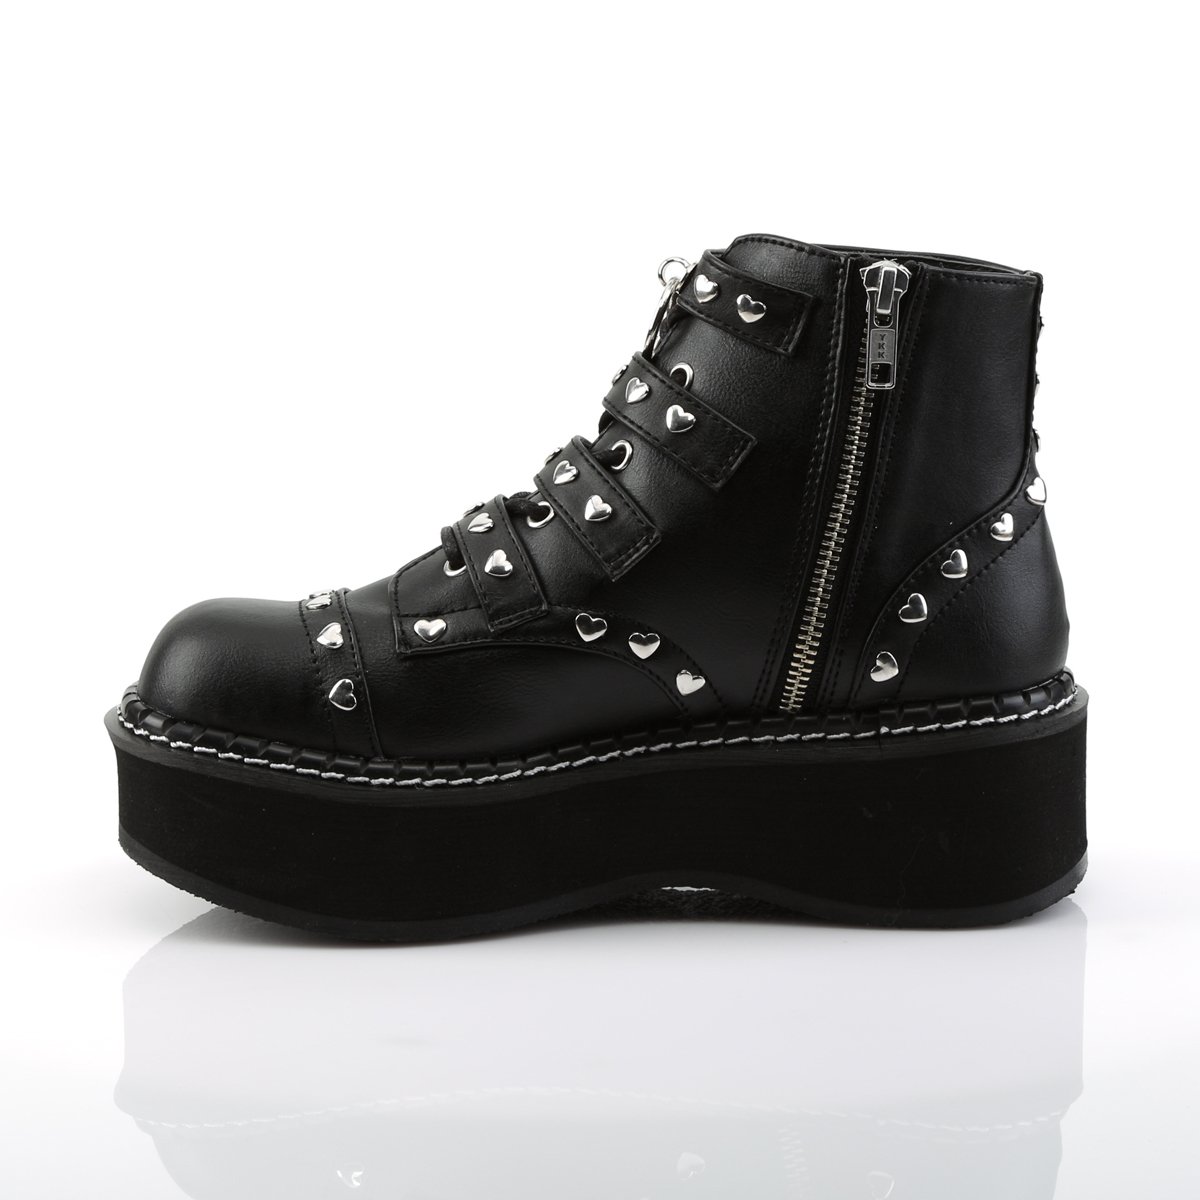 Demonia Emily-315 Women's Ankle Boots 